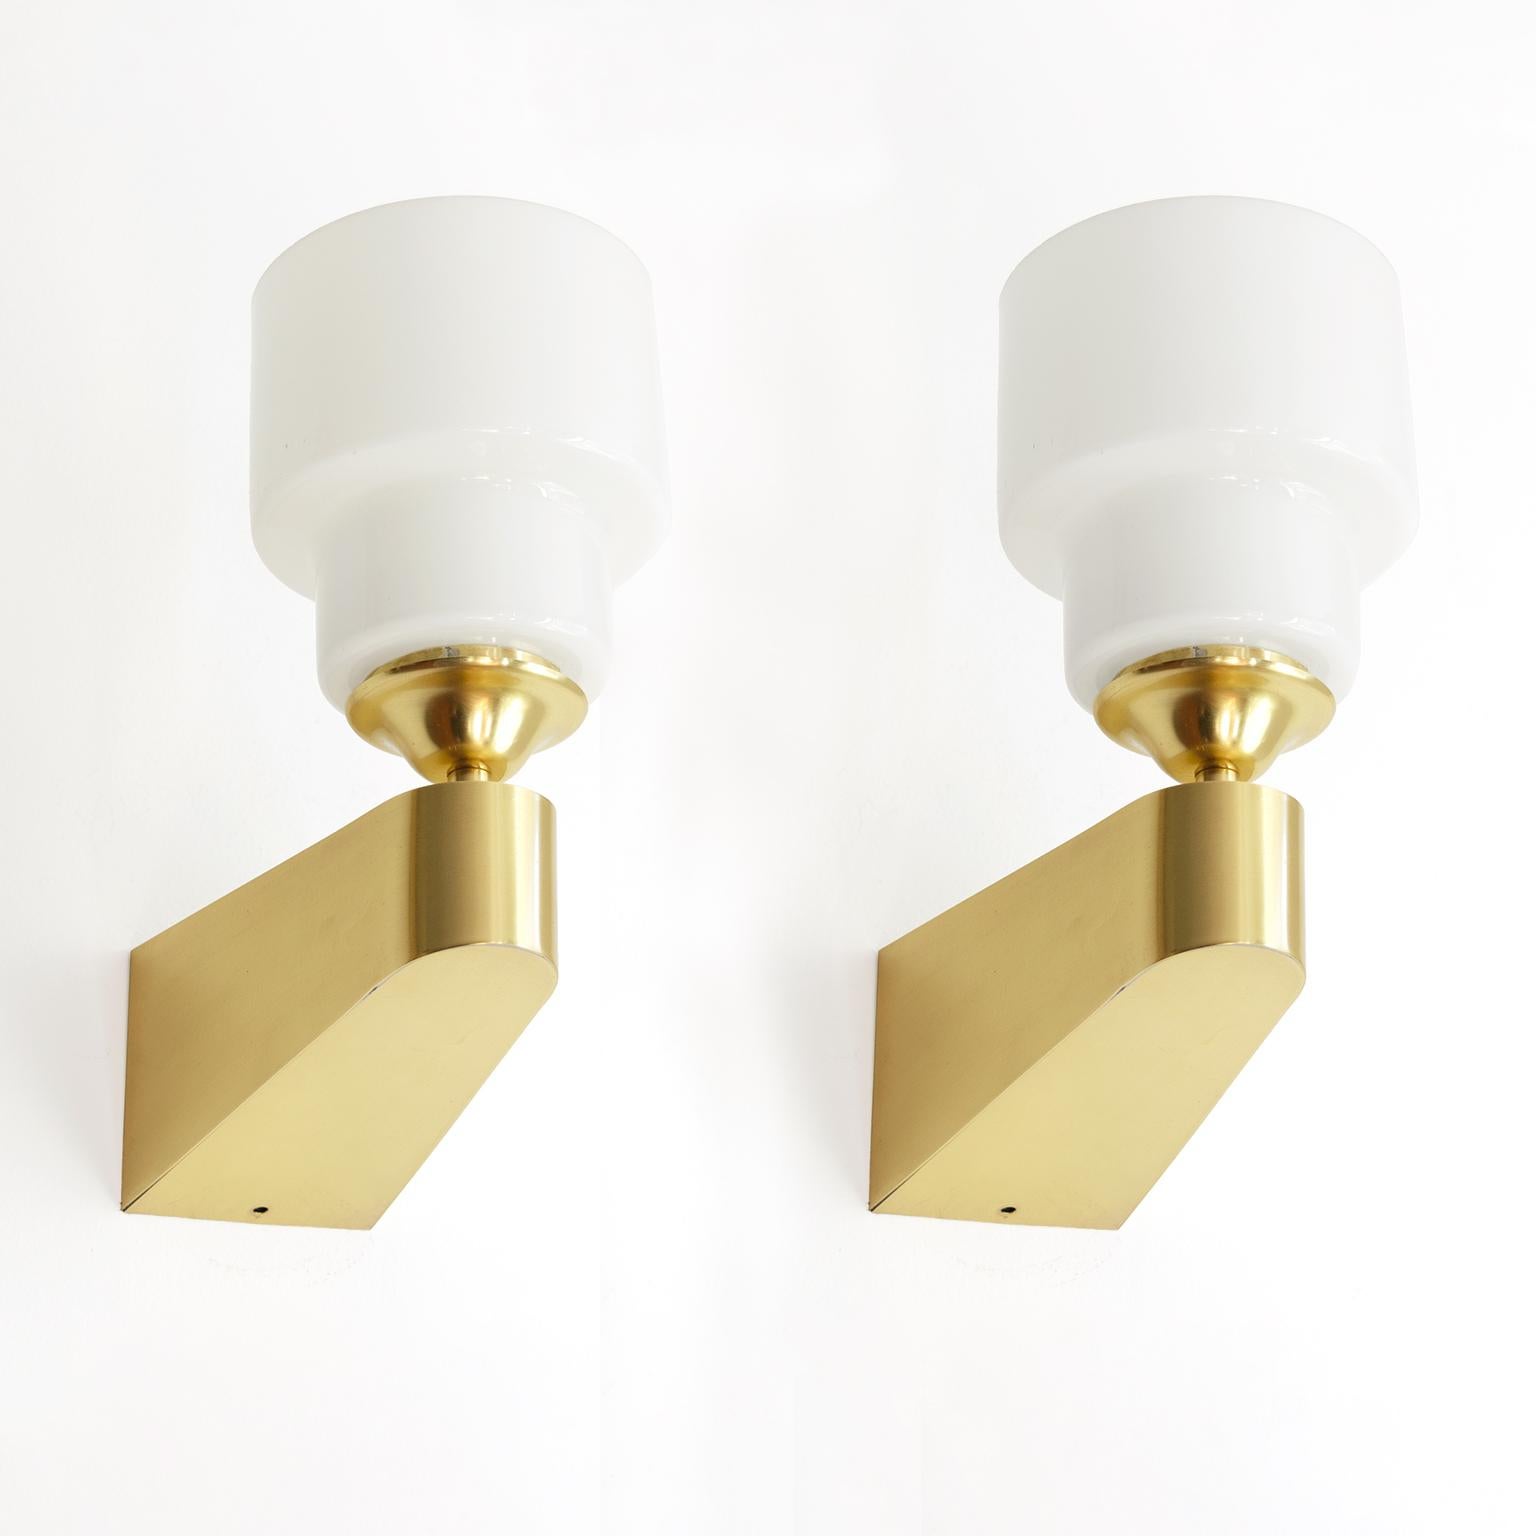 Pair of Itsu, wedge shaped polished brass with opal glass shades with a stepped shape. The sconces have been newly rewired with single standard base sockets for us in the USA. The brass has been newly polished and lacquered. Very good condition with